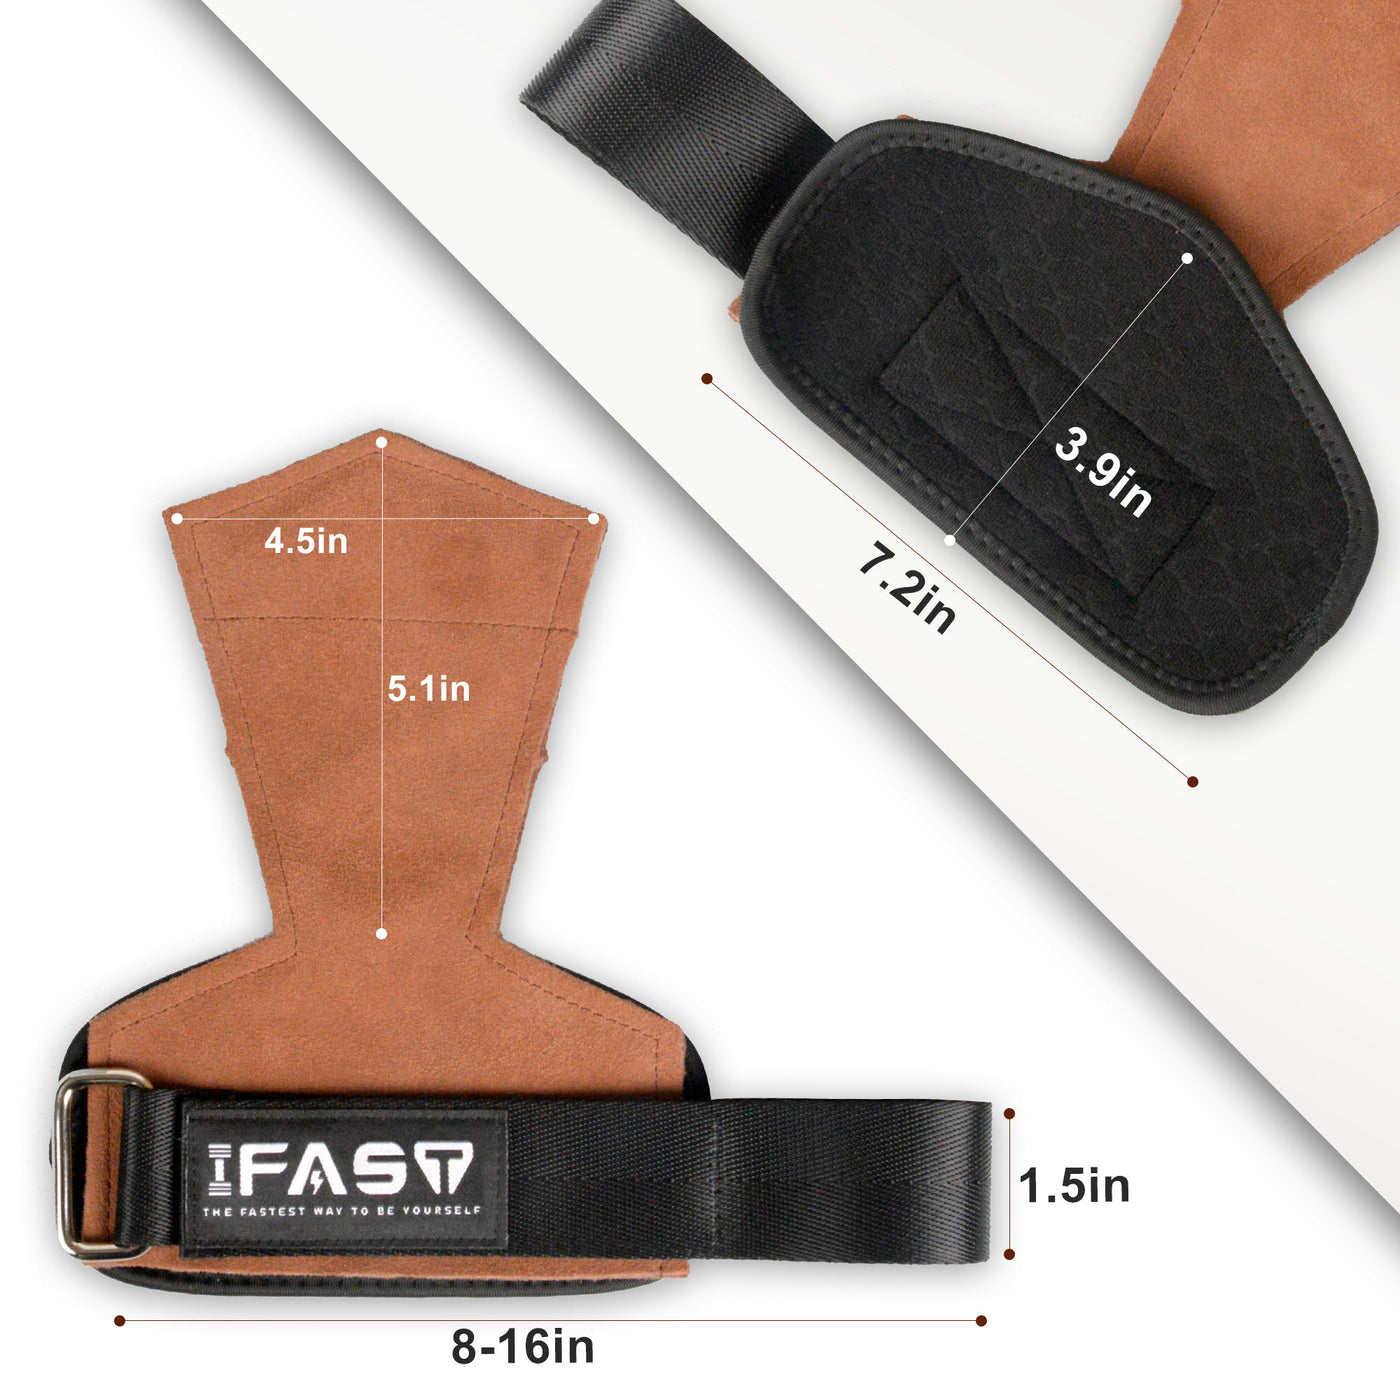 IFAST weightlifting hook sizes